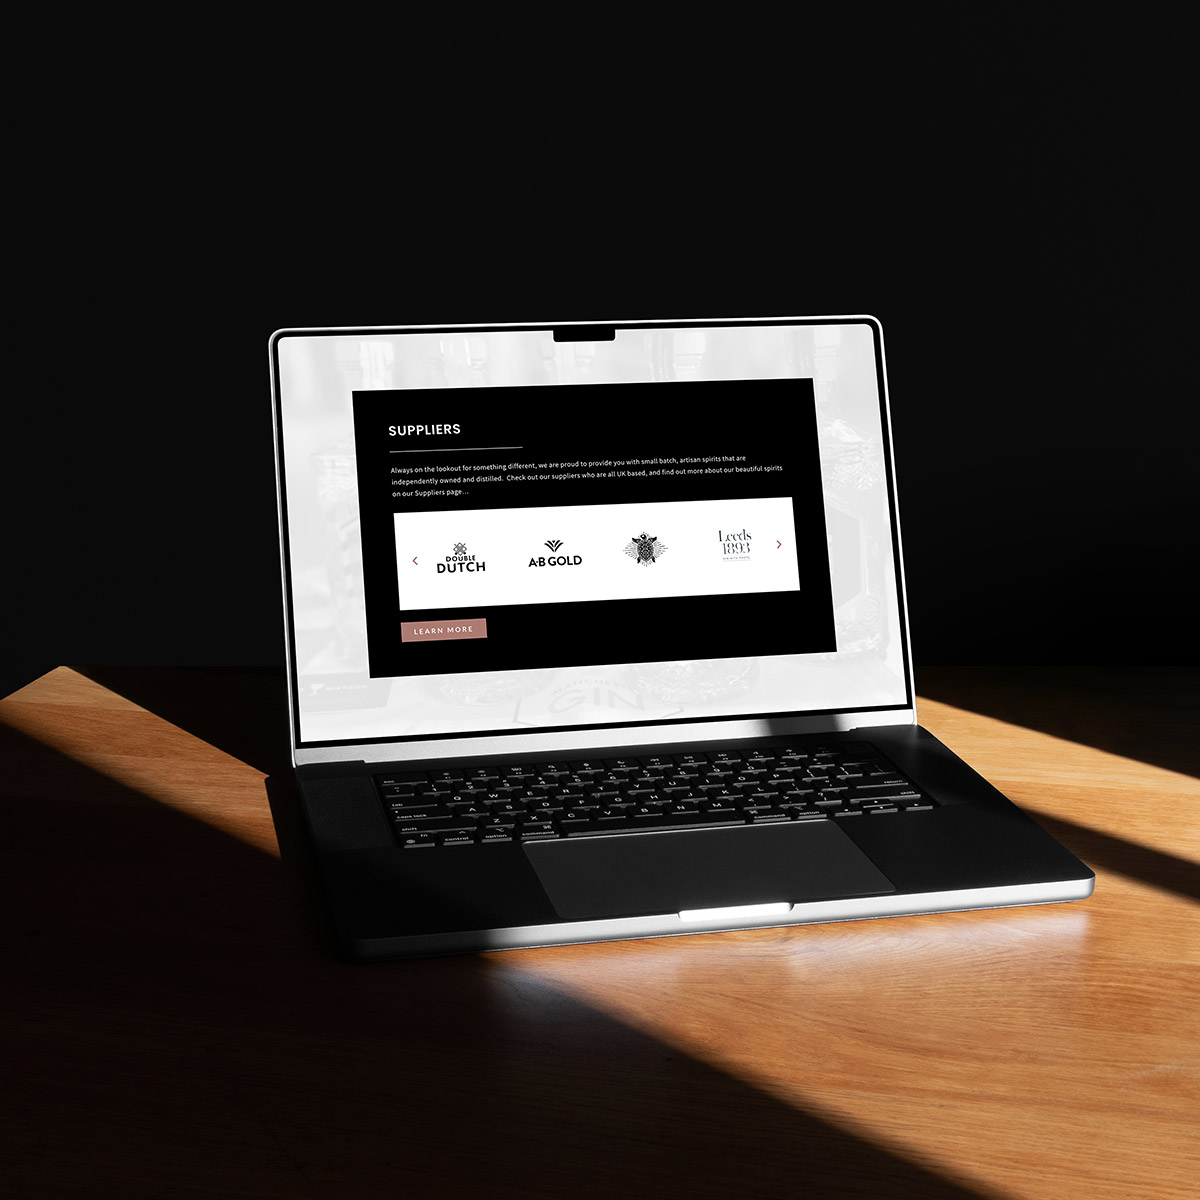 A mockup of a website design being shown on a laptop